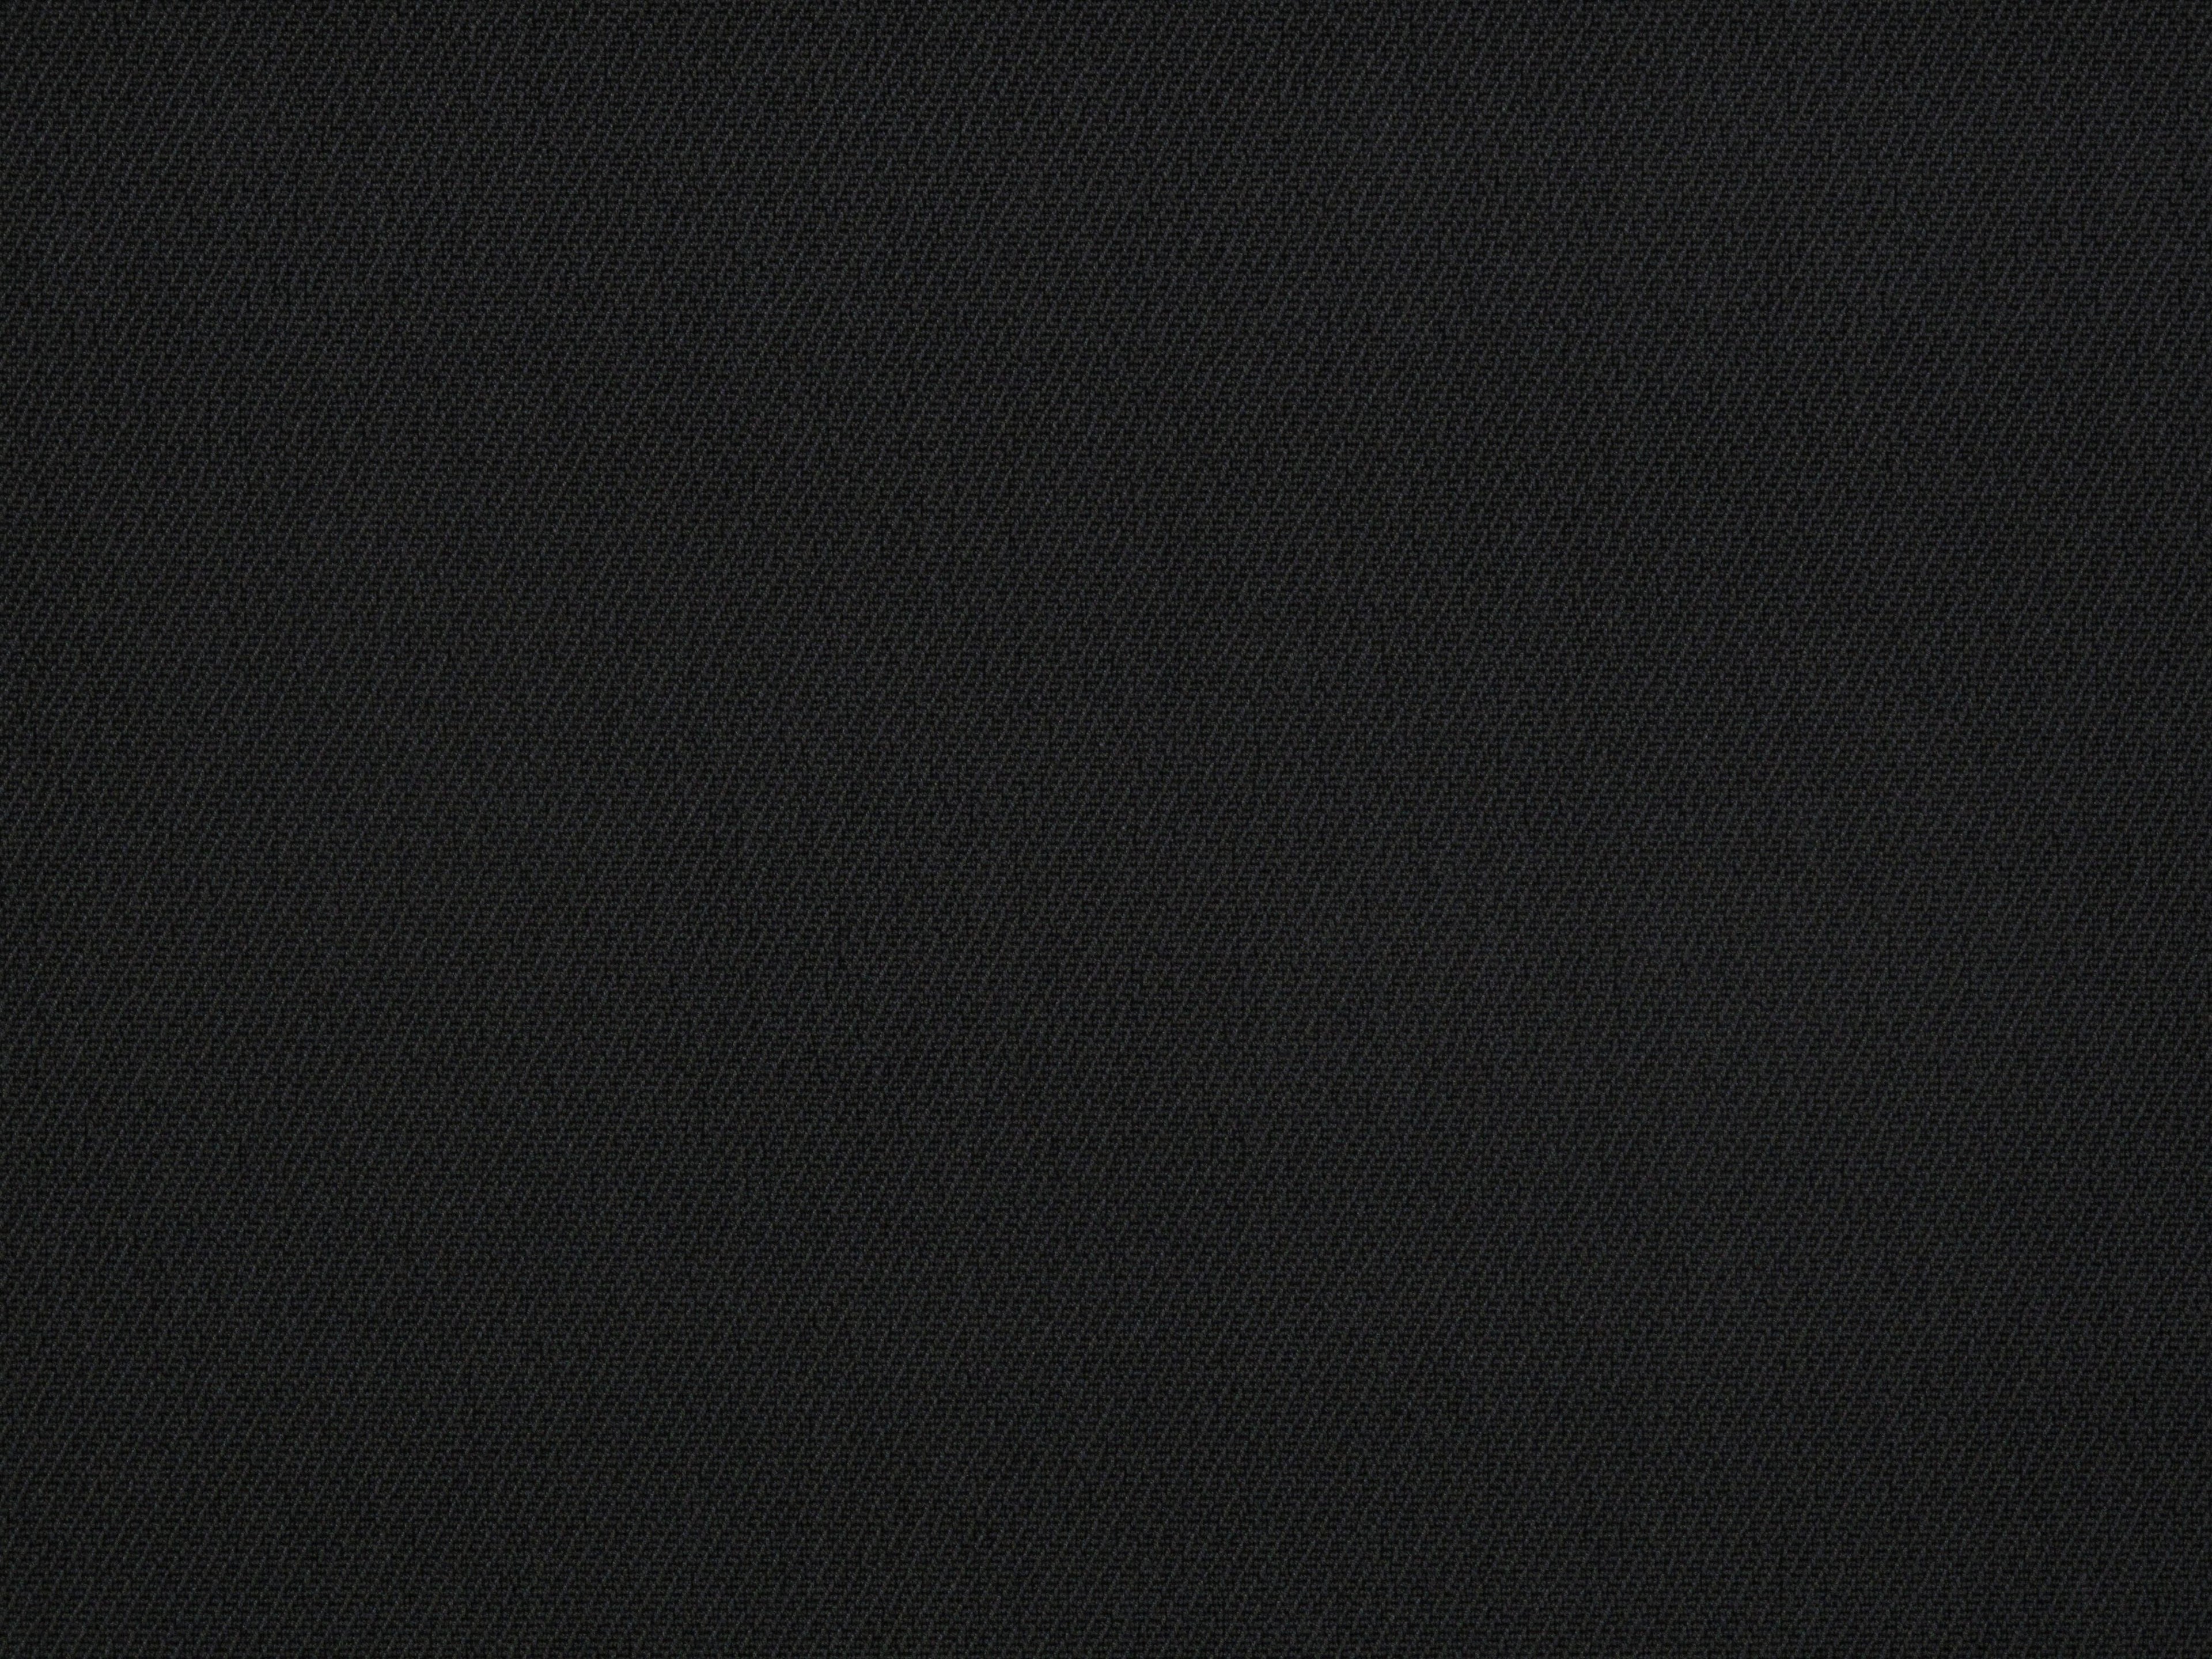 Brandenburg fabric in black color - pattern number RH 00011314 - by Scalamandre in the Old World Weavers collection